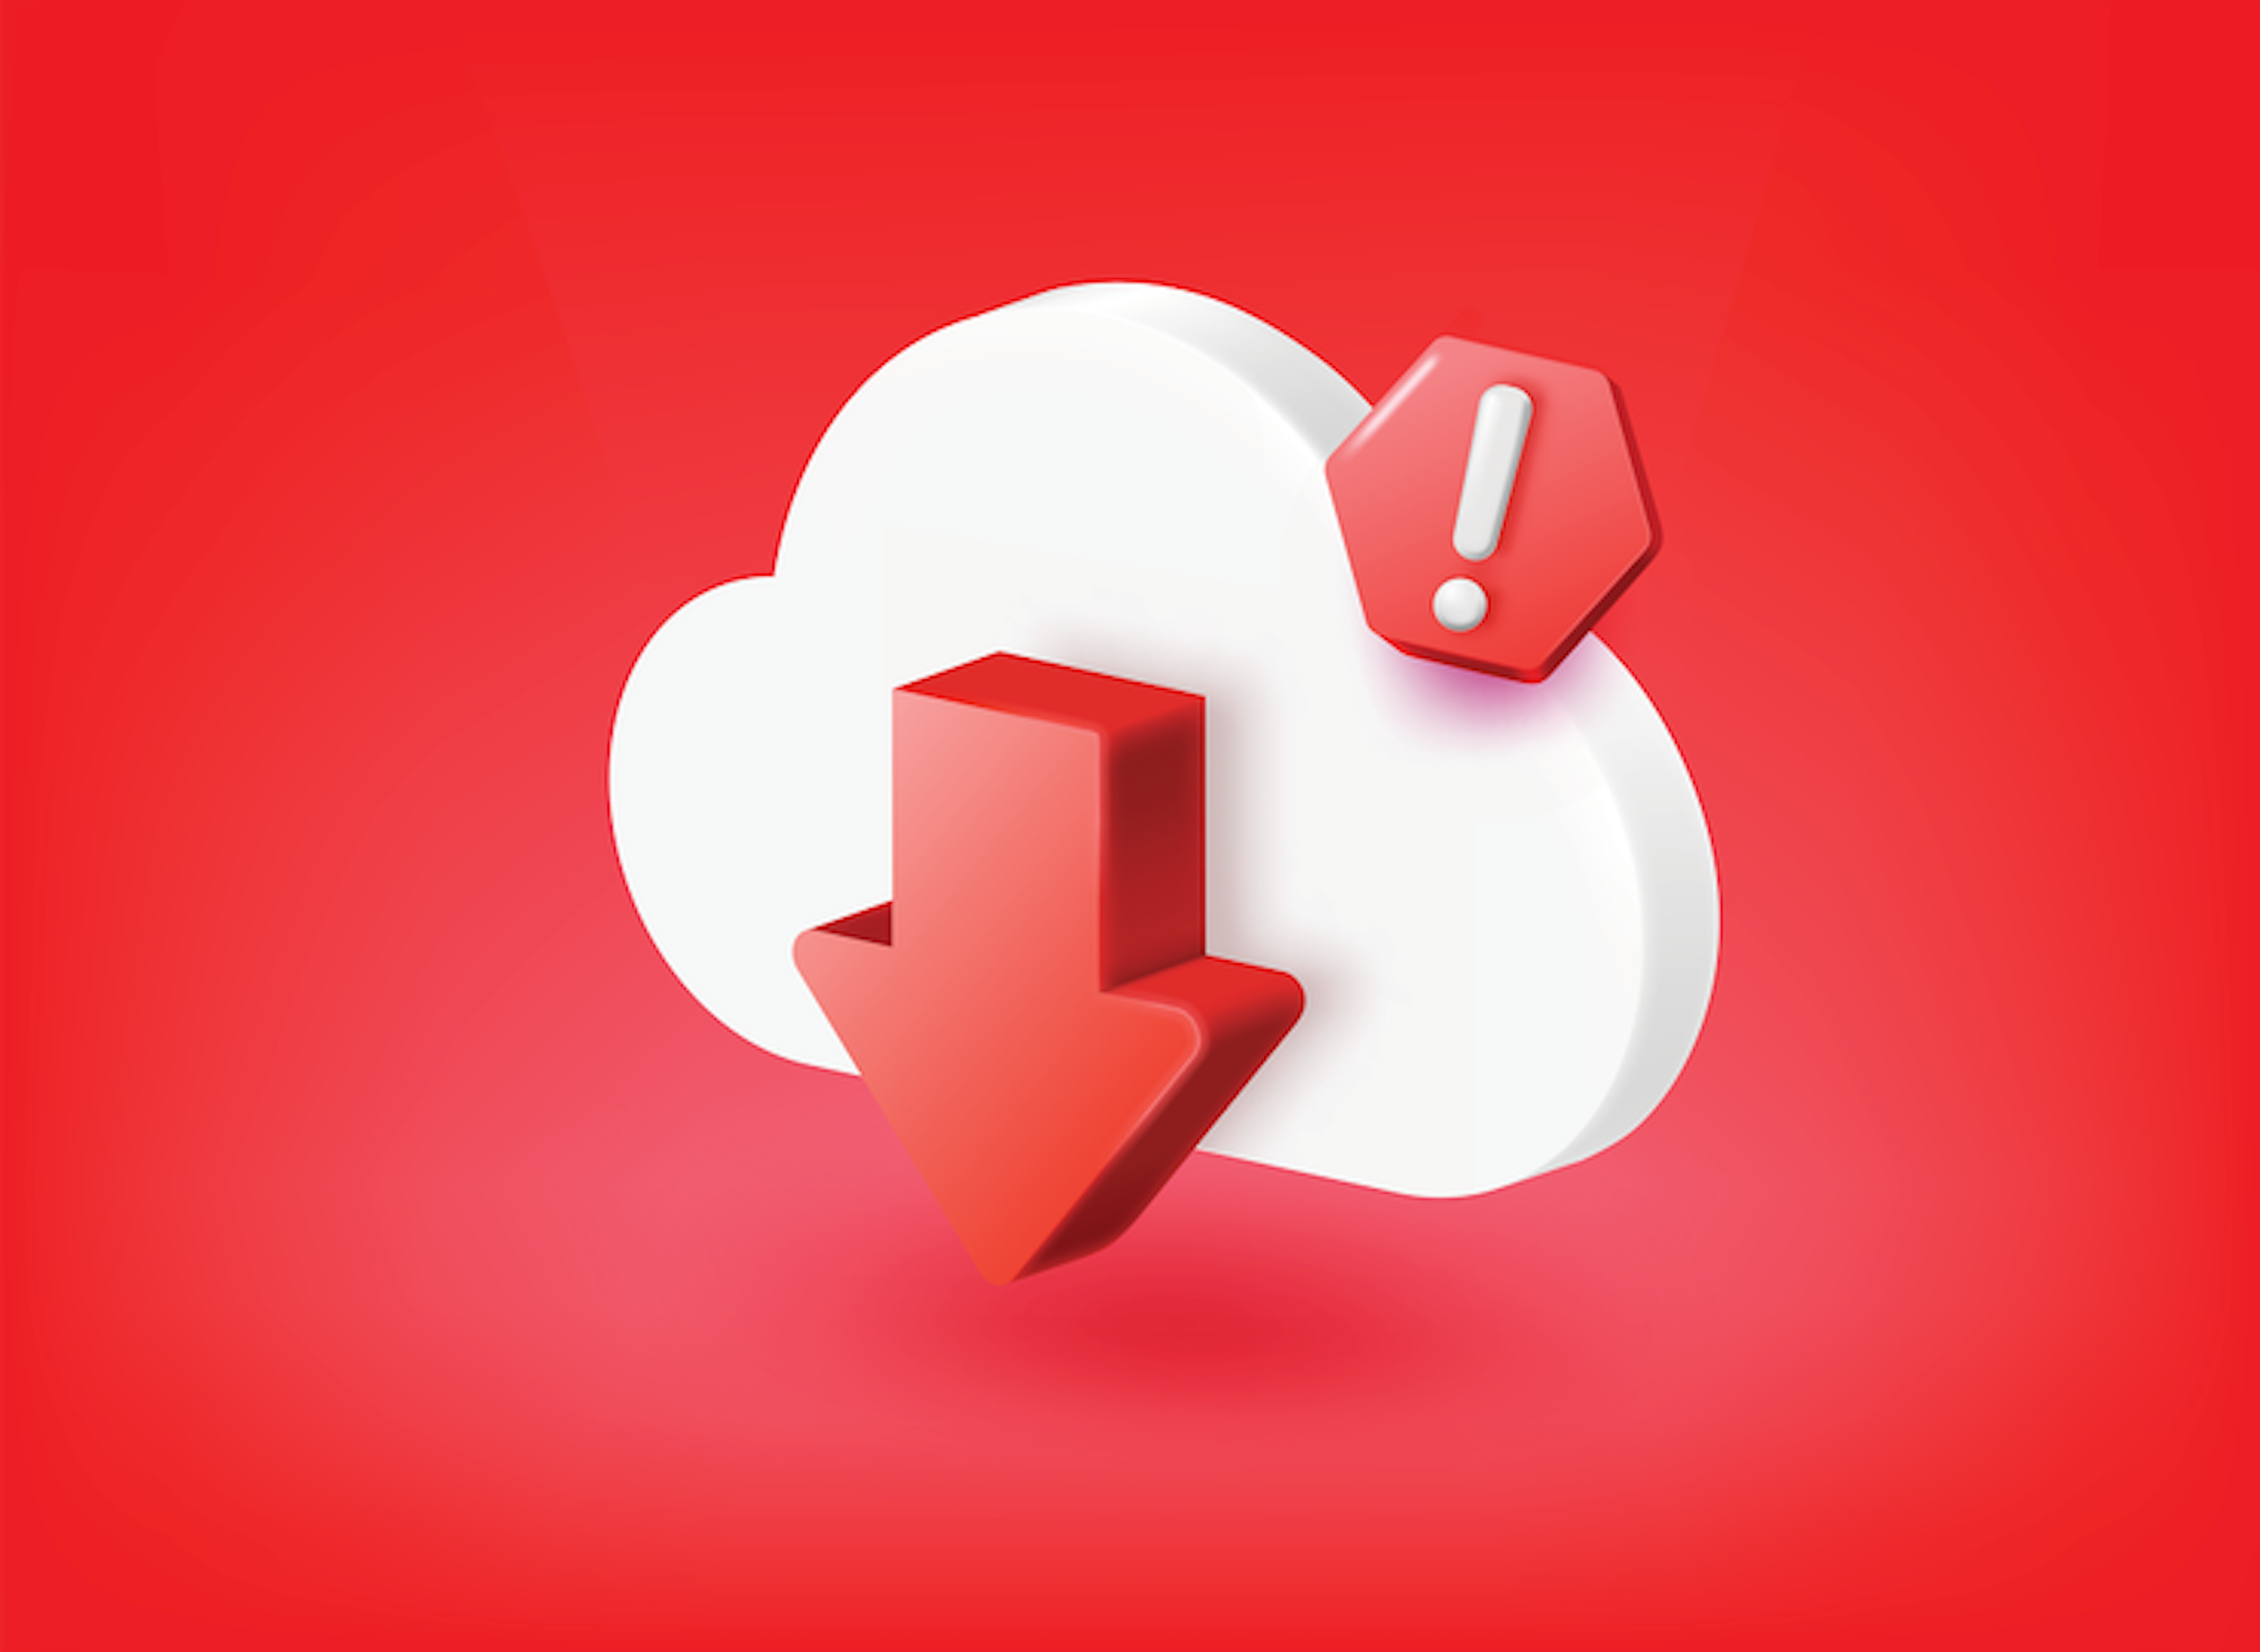 3D model of a cloud on red background with error message